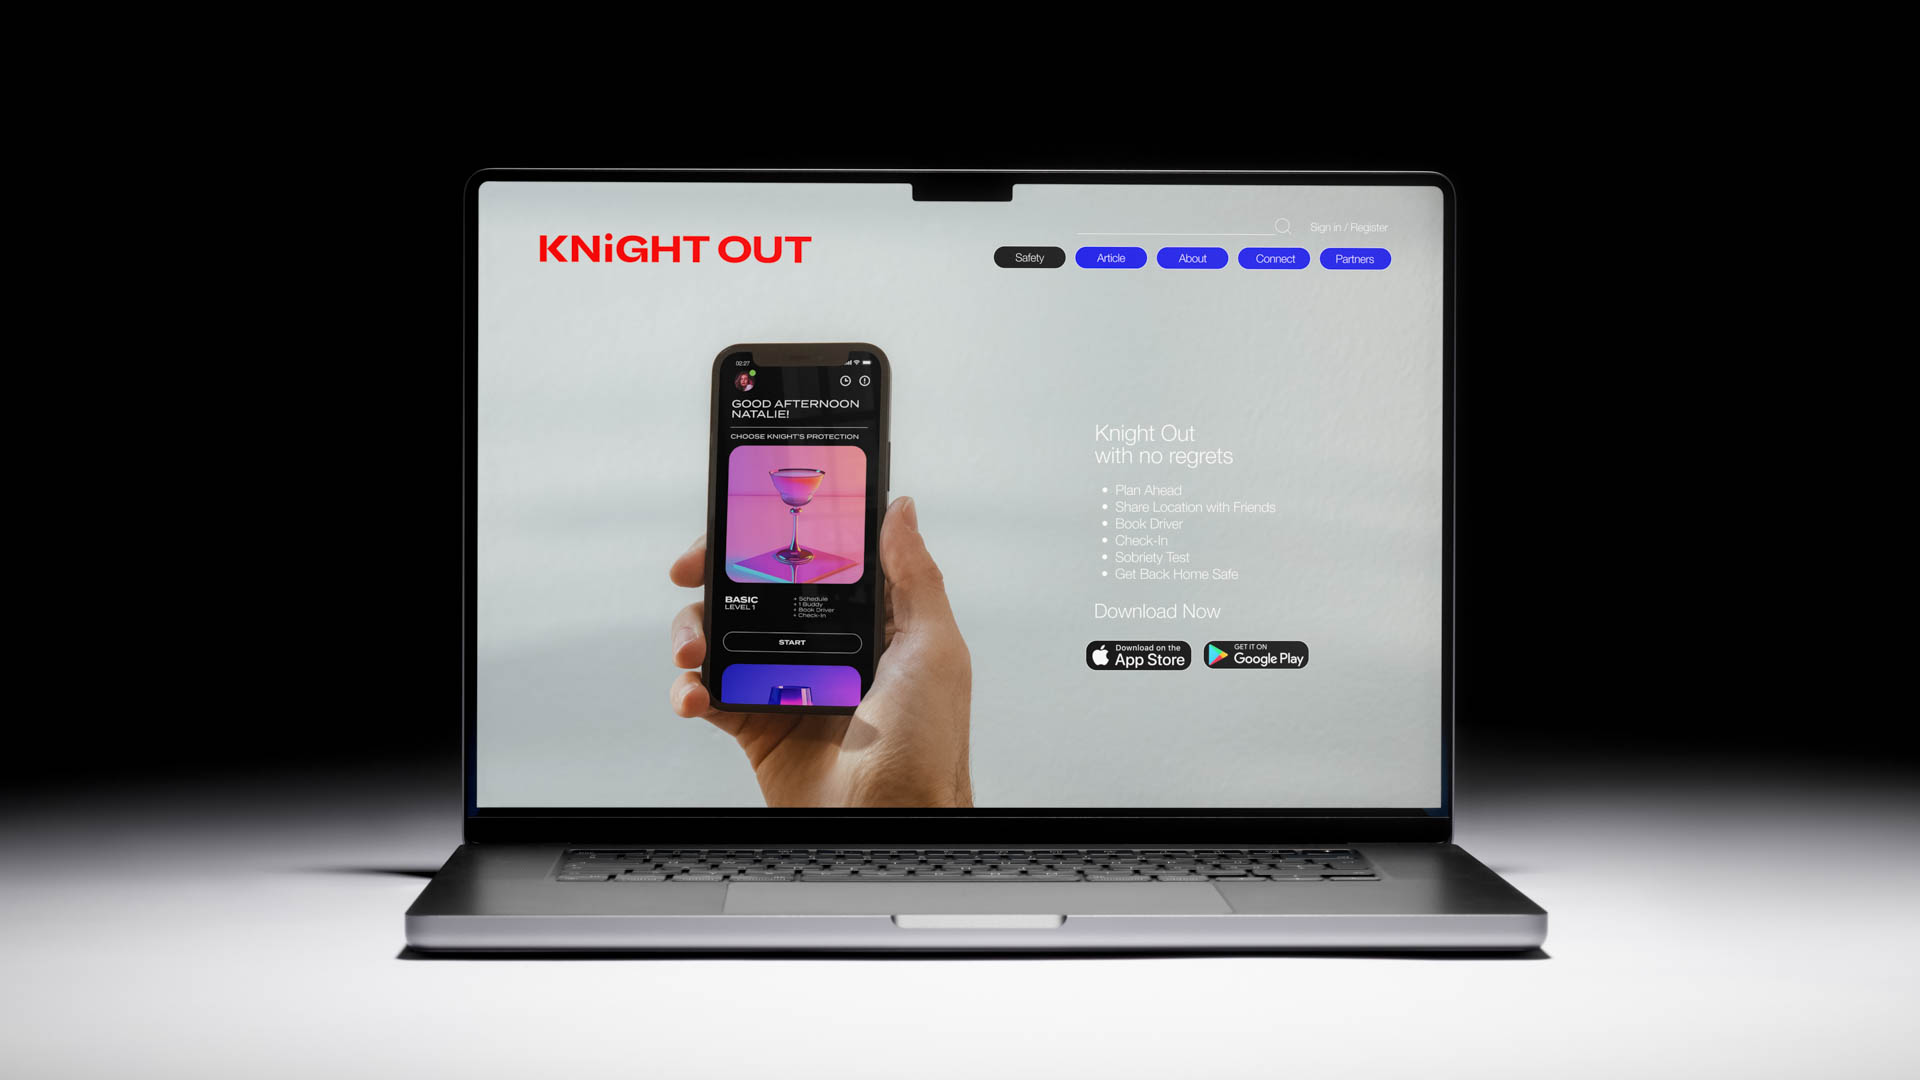 knight out webpage shown on an open laptop